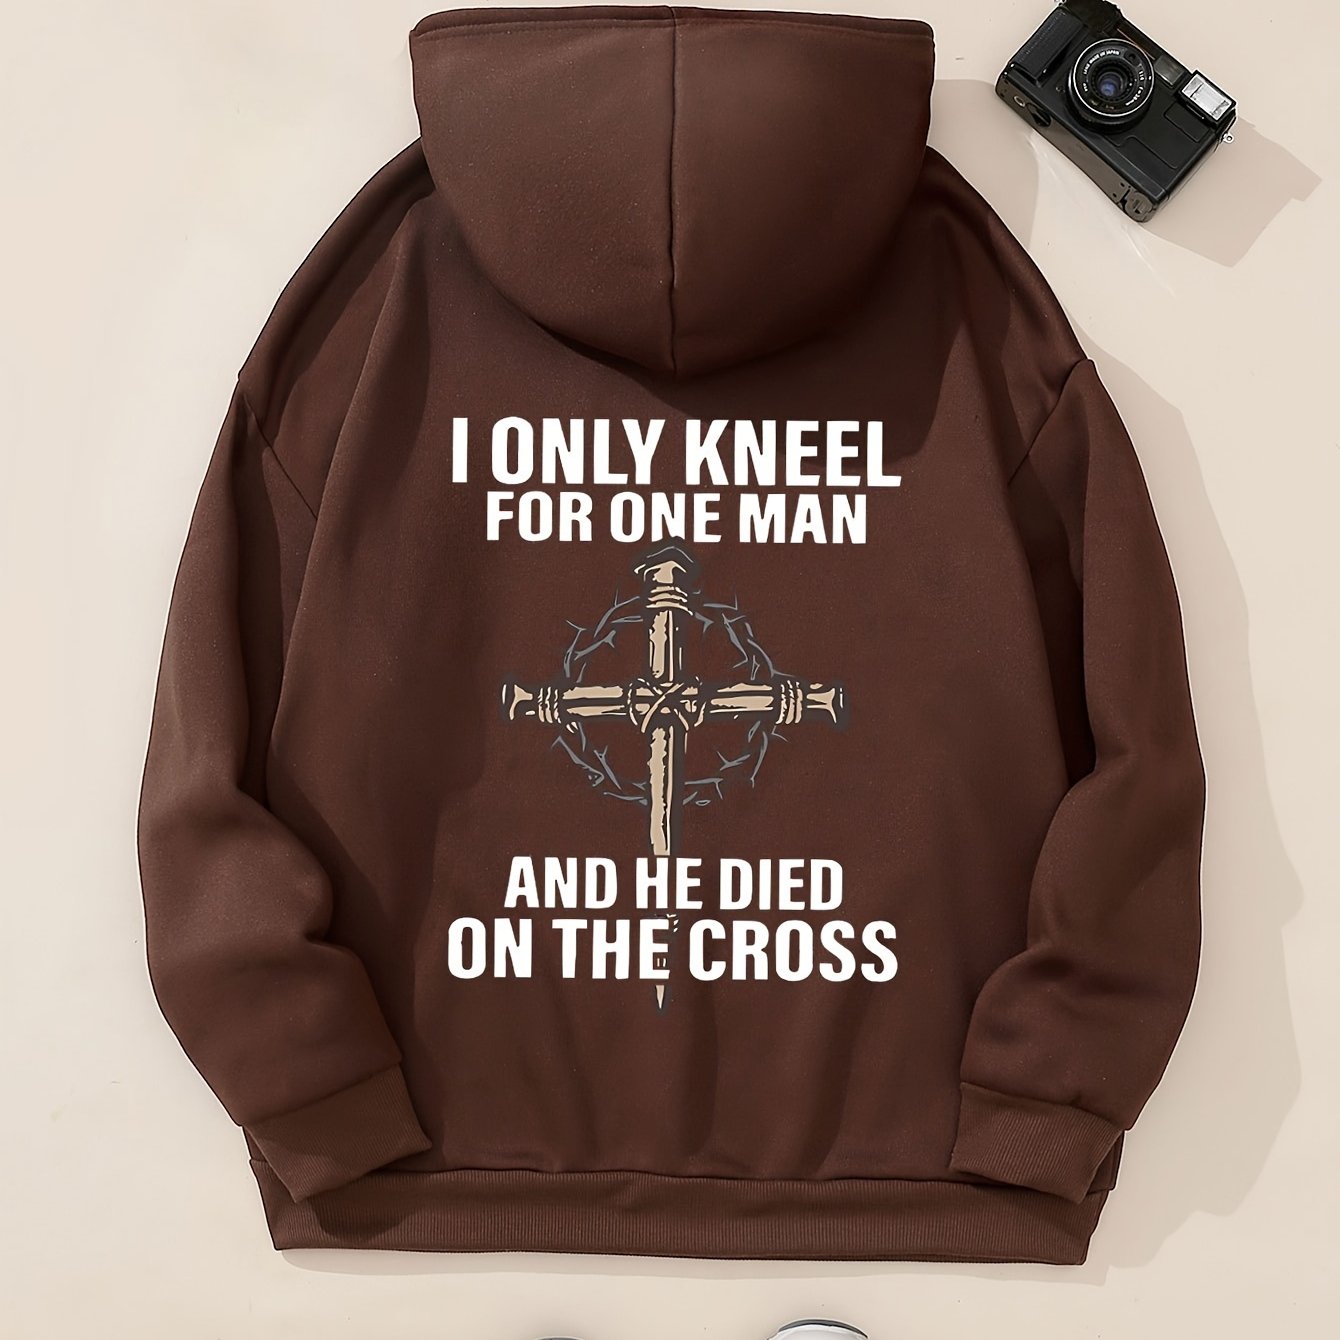 I Only Kneel For One Man & He Died On The Cross Women's Christian Pullover Hooded Sweatshirt claimedbygoddesigns